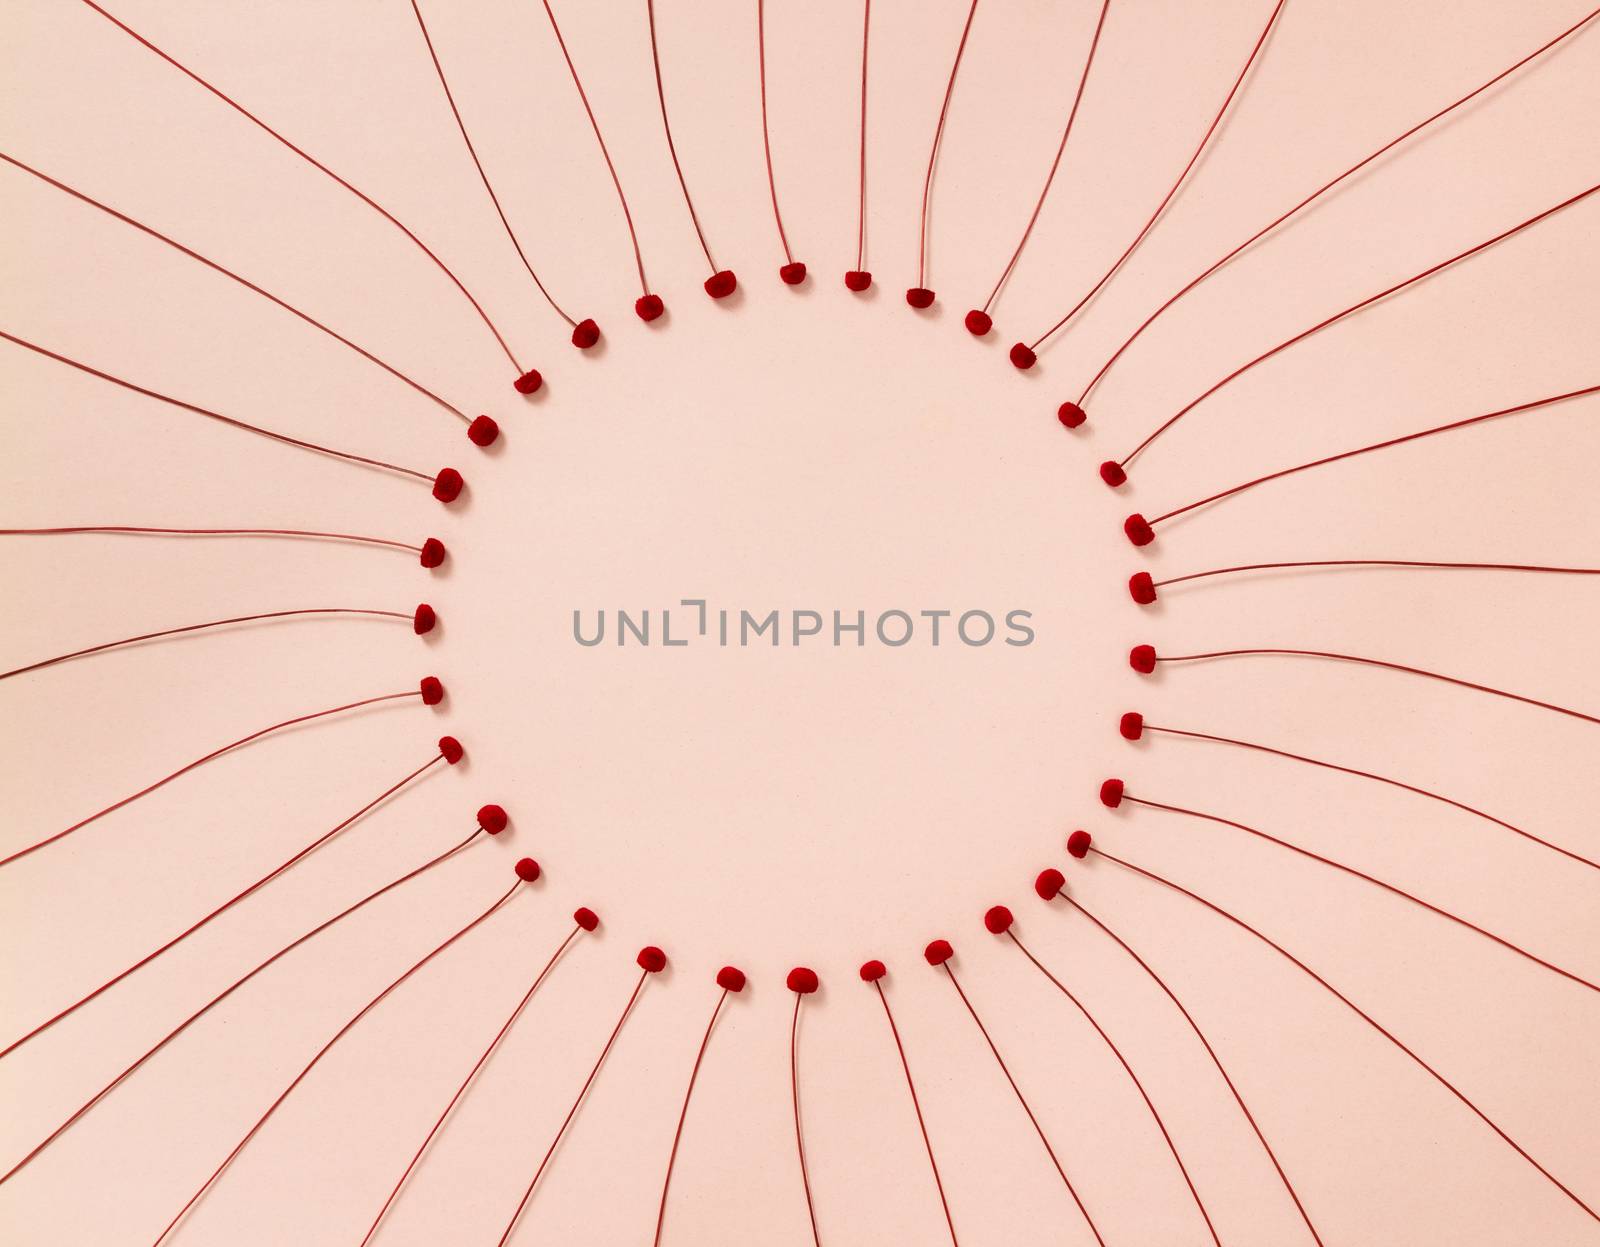 Round frame made of delicate red flowers, on pastel pink background.